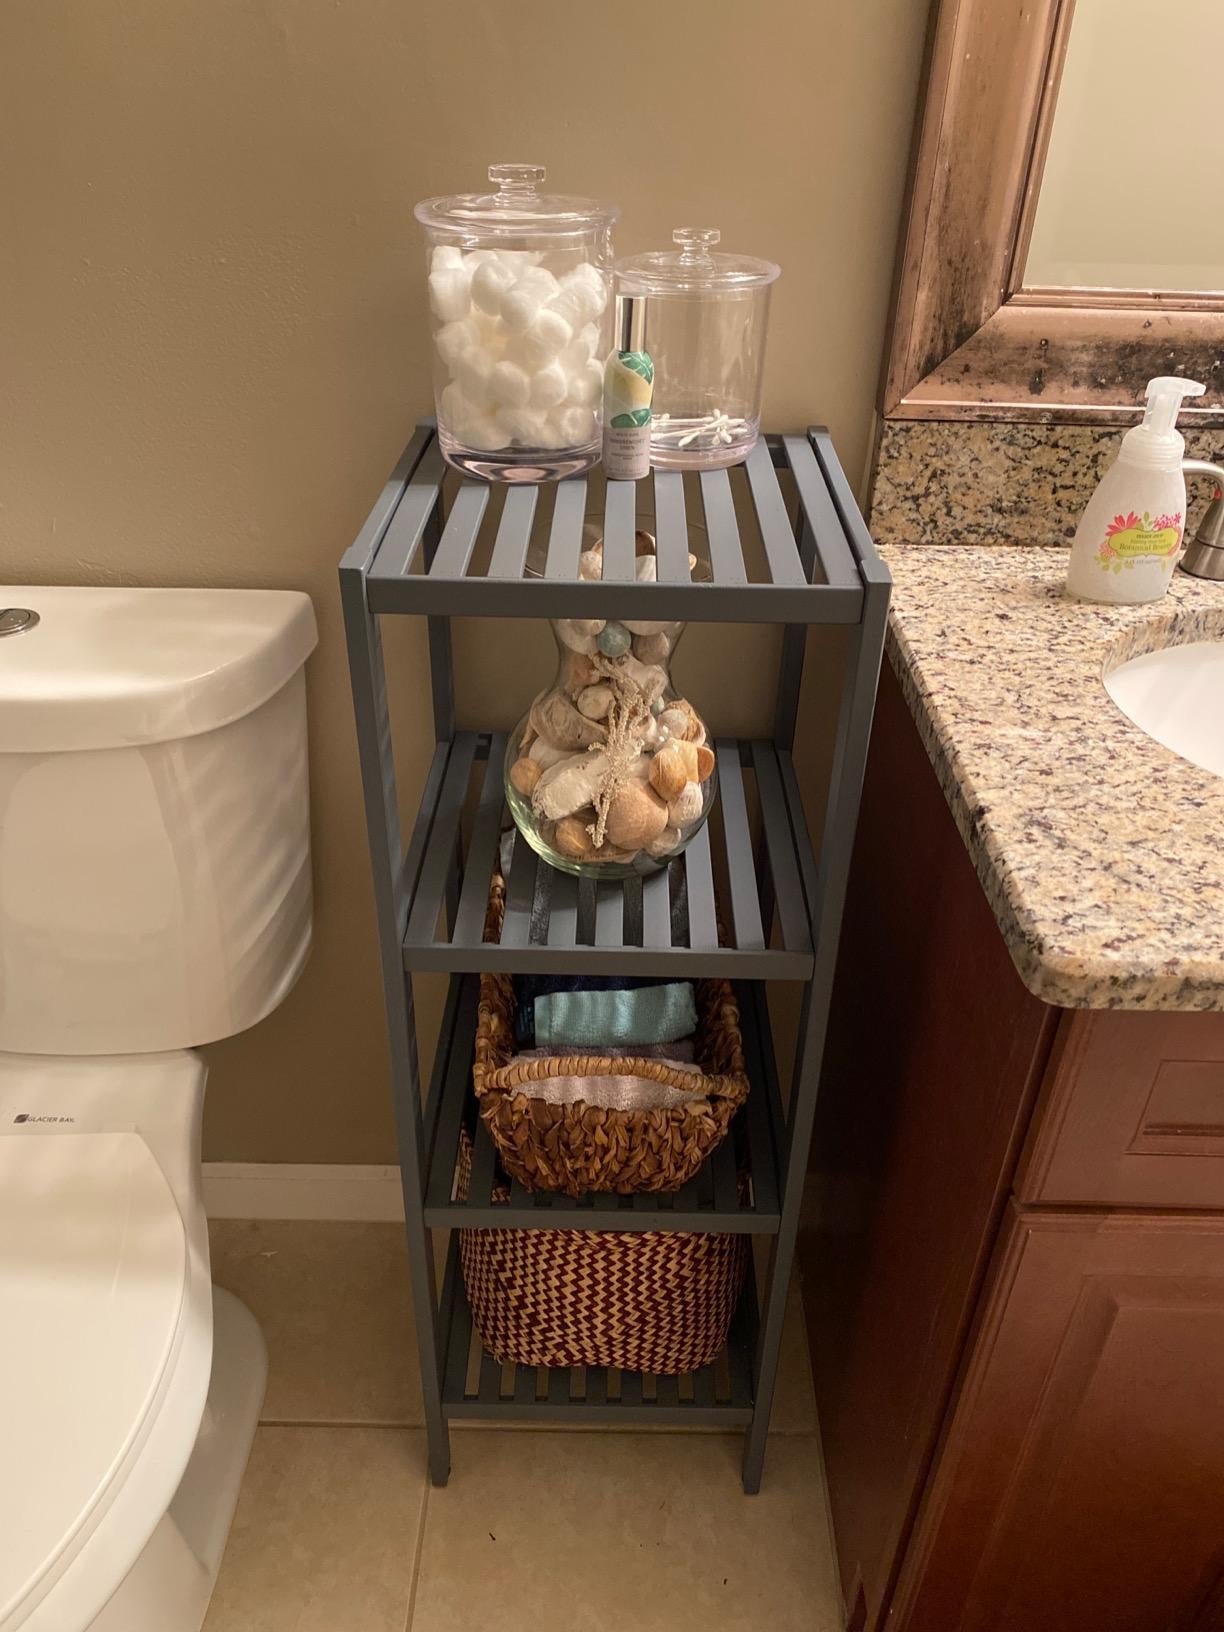 22 Best Bathroom Shelves To Clear Up Cabinet Space